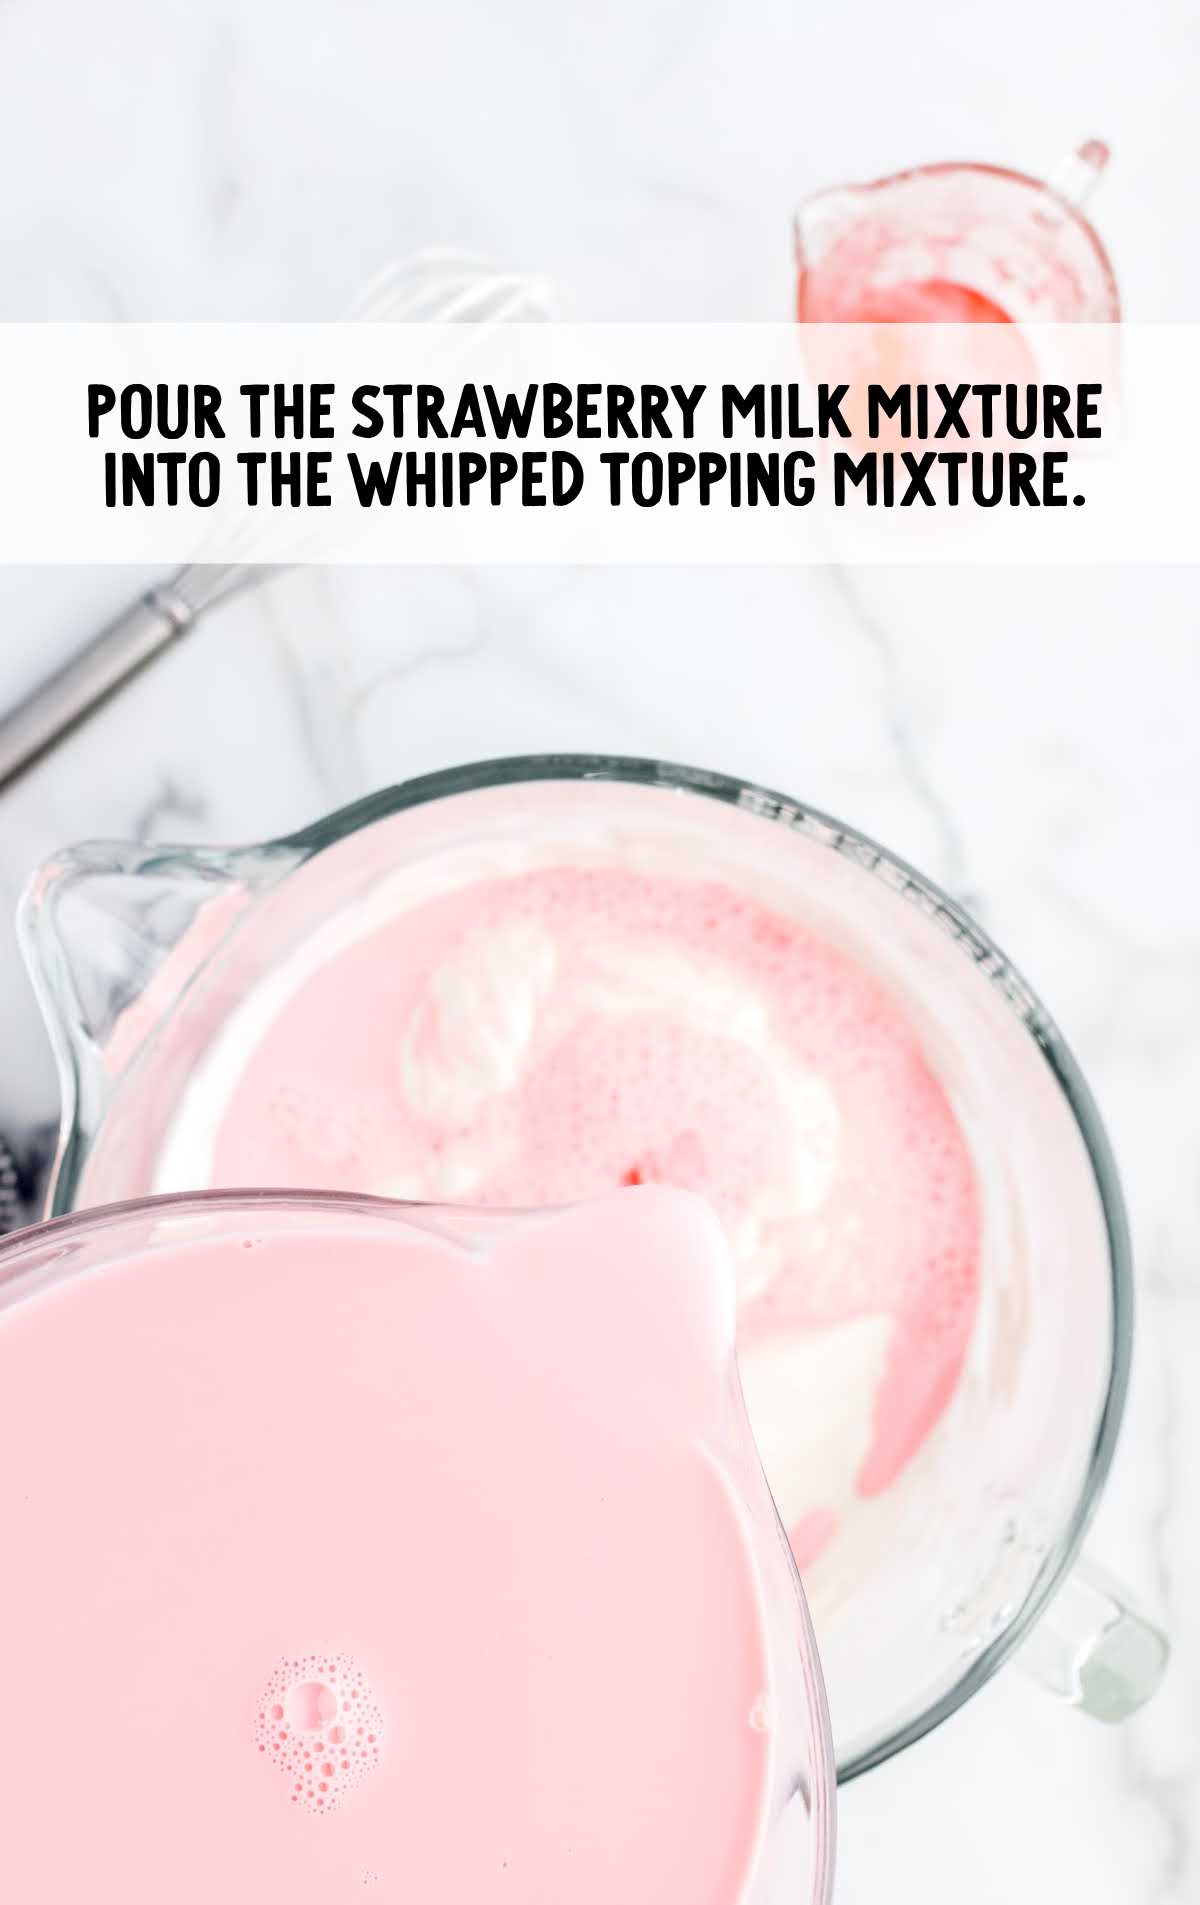 strawberry milk mixture poured into the whipped topping mixture